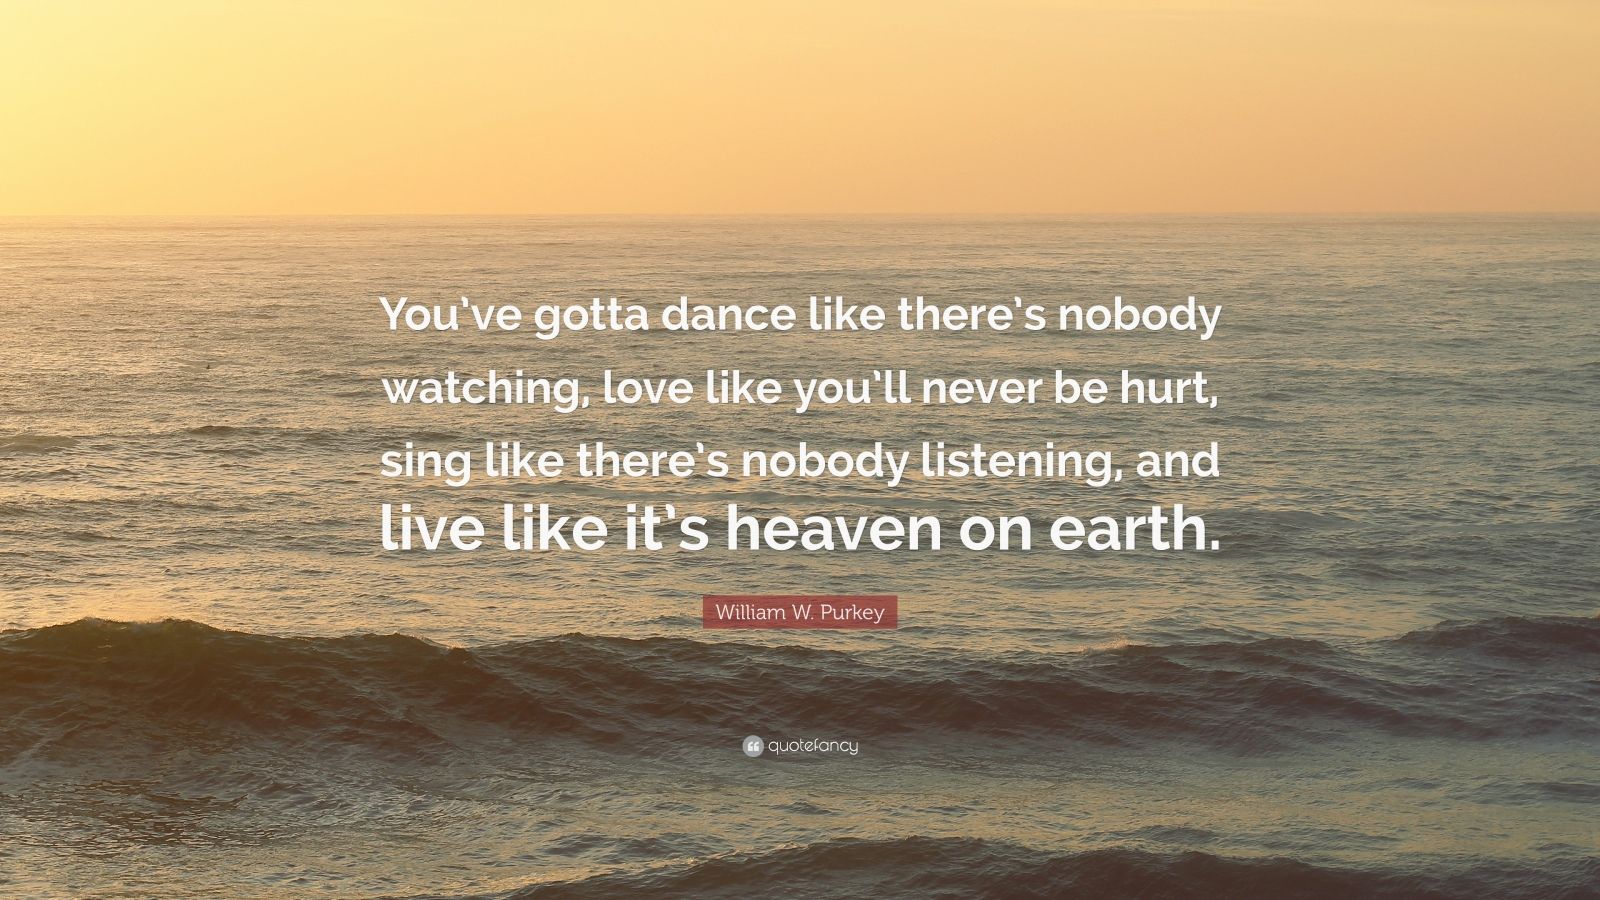 William W. Purkey Quote: "You've gotta dance like there's nobody watching, love like you'll ...